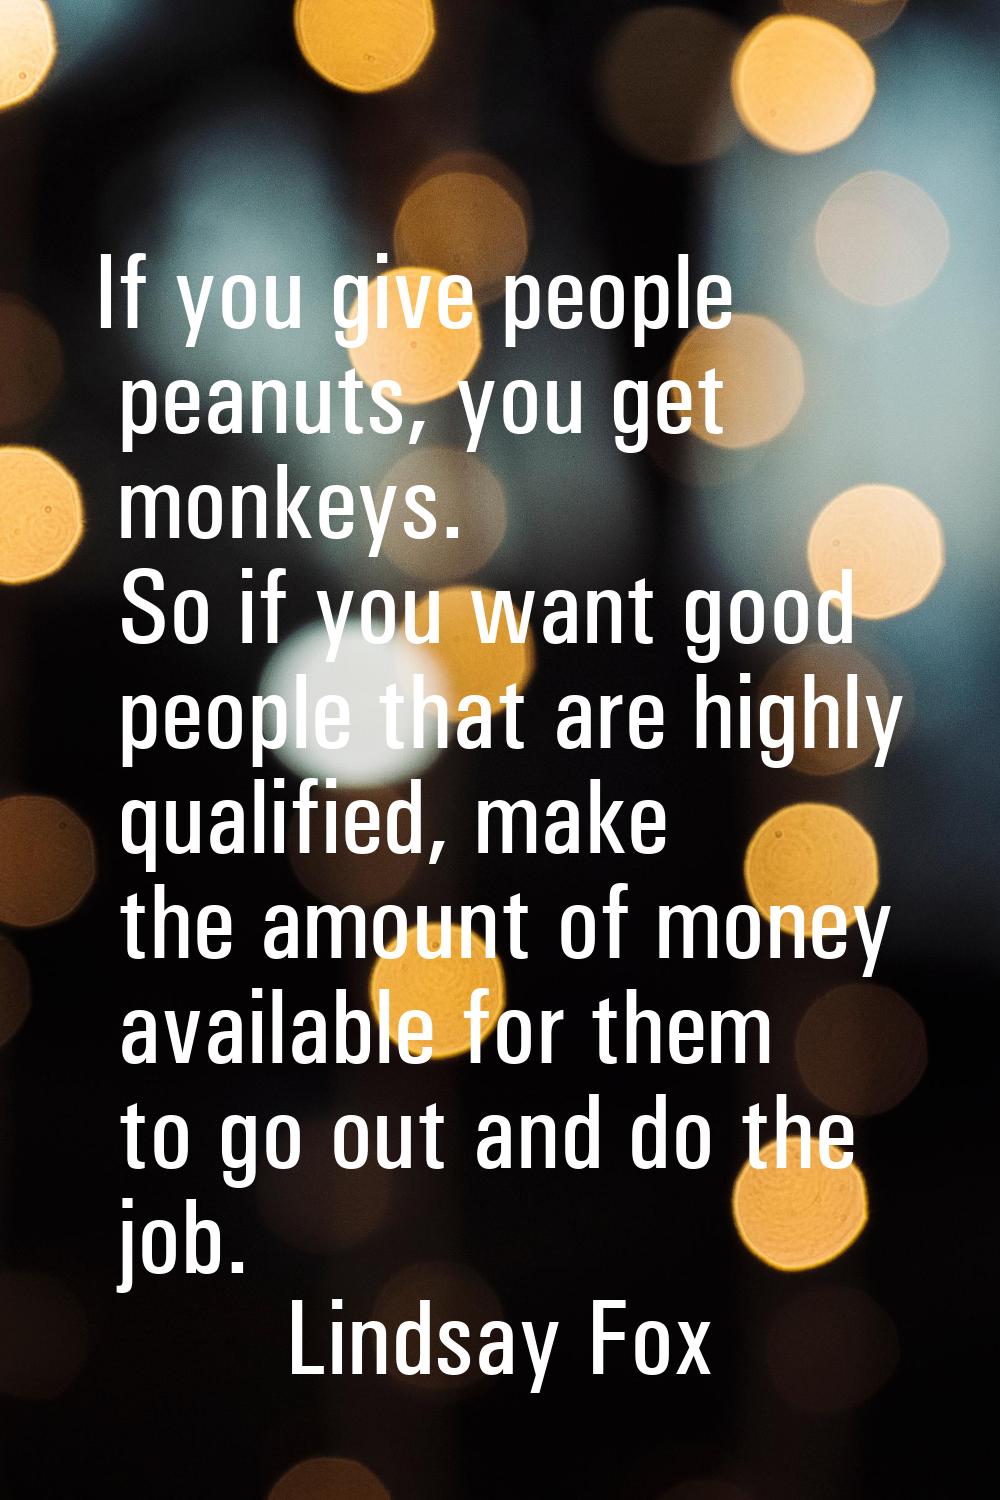 If you give people peanuts, you get monkeys. So if you want good people that are highly qualified, 